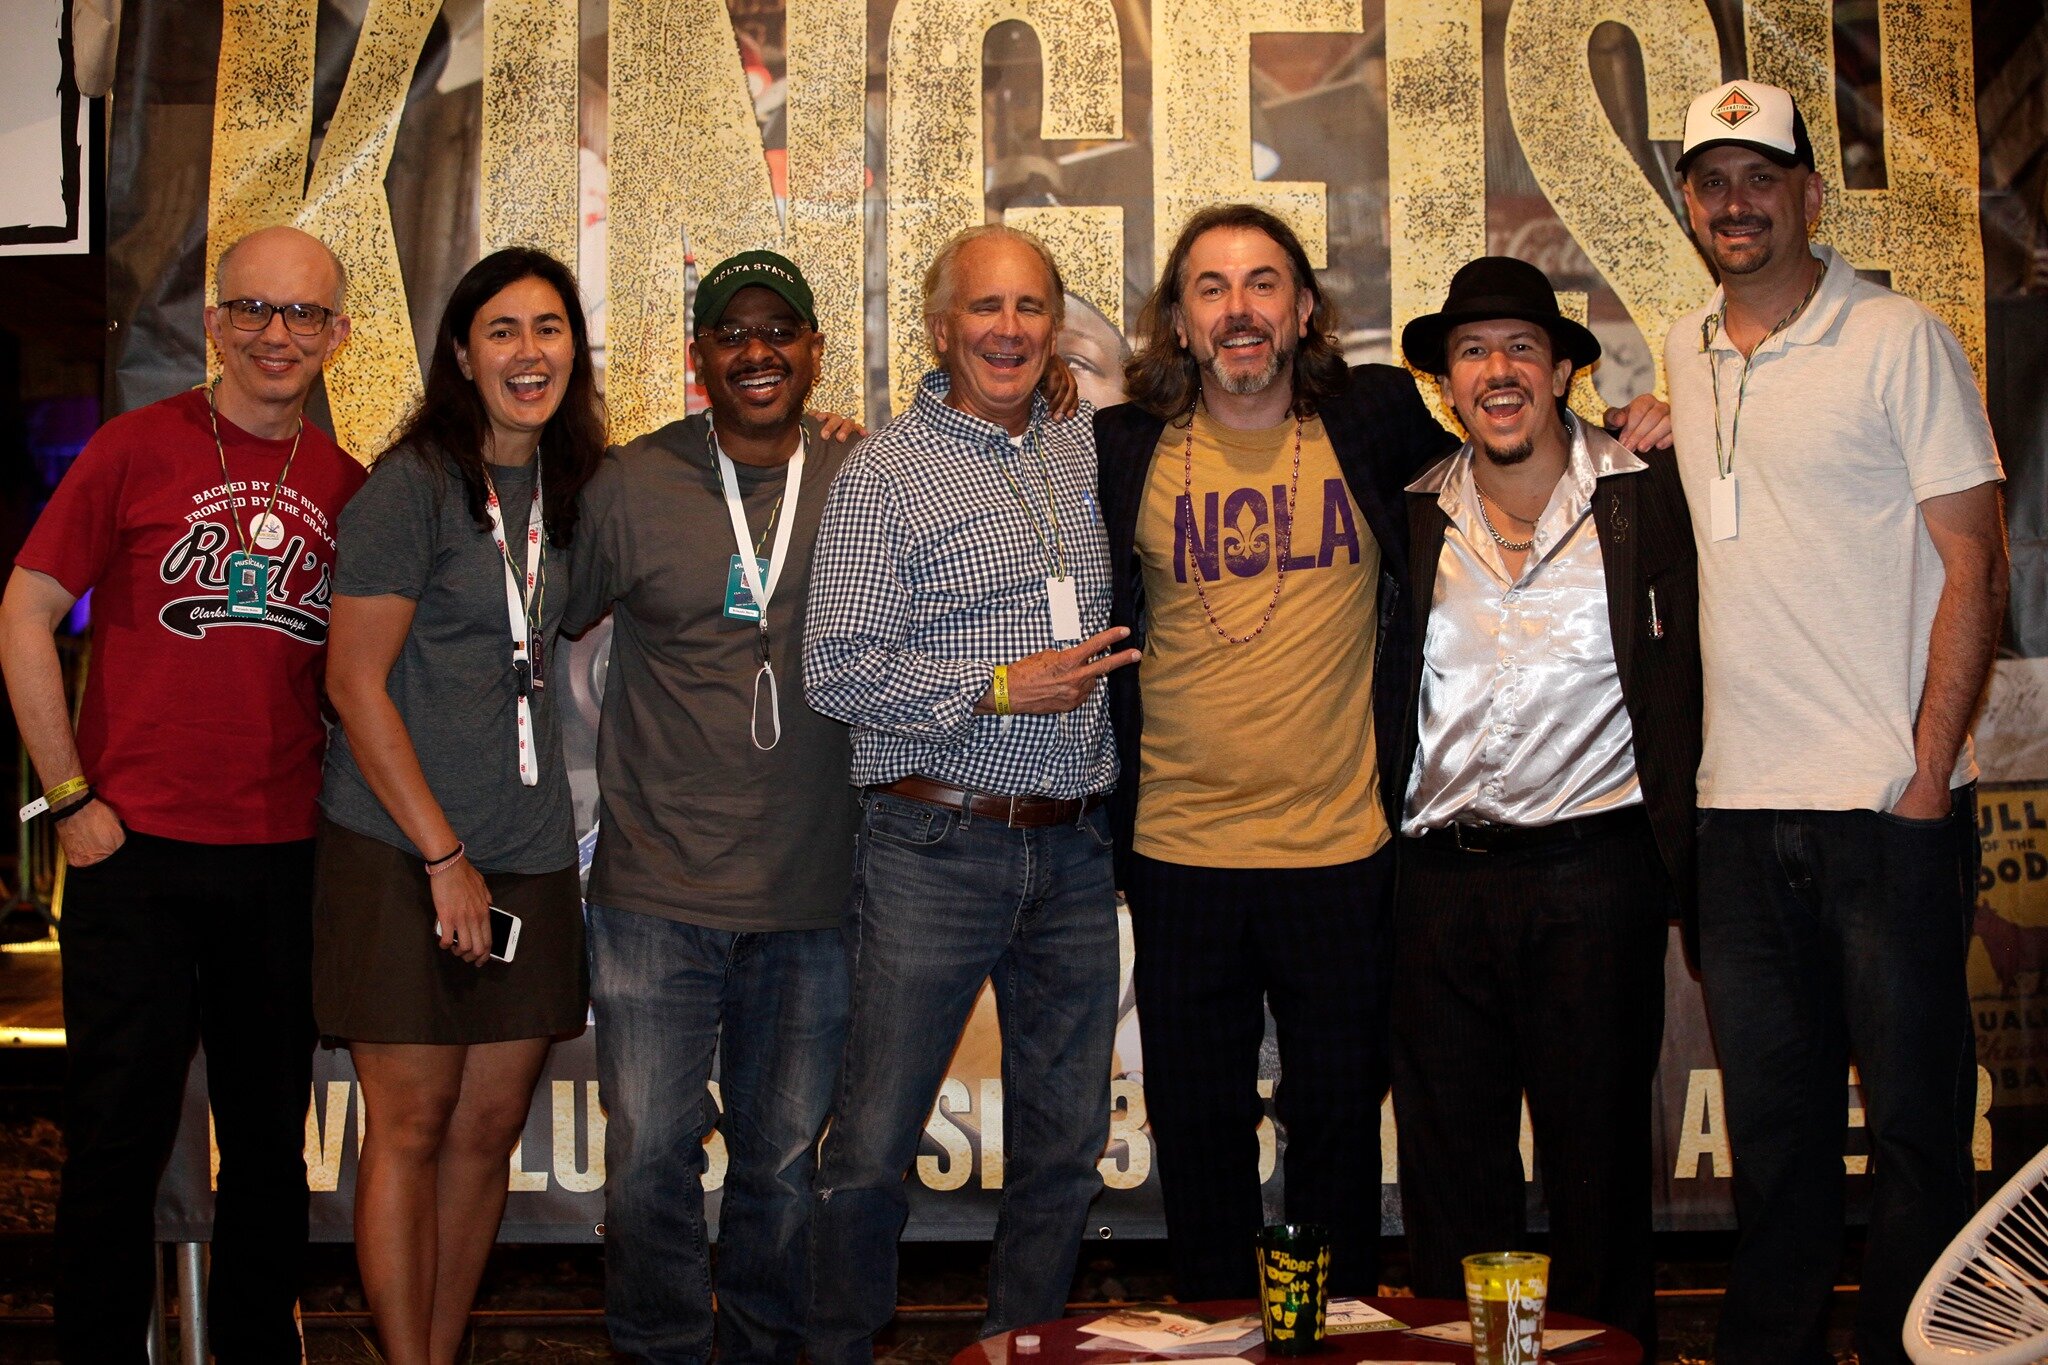 The “Delta Delegation” poses with organizers of the Mississippi Delta Blues Festival.